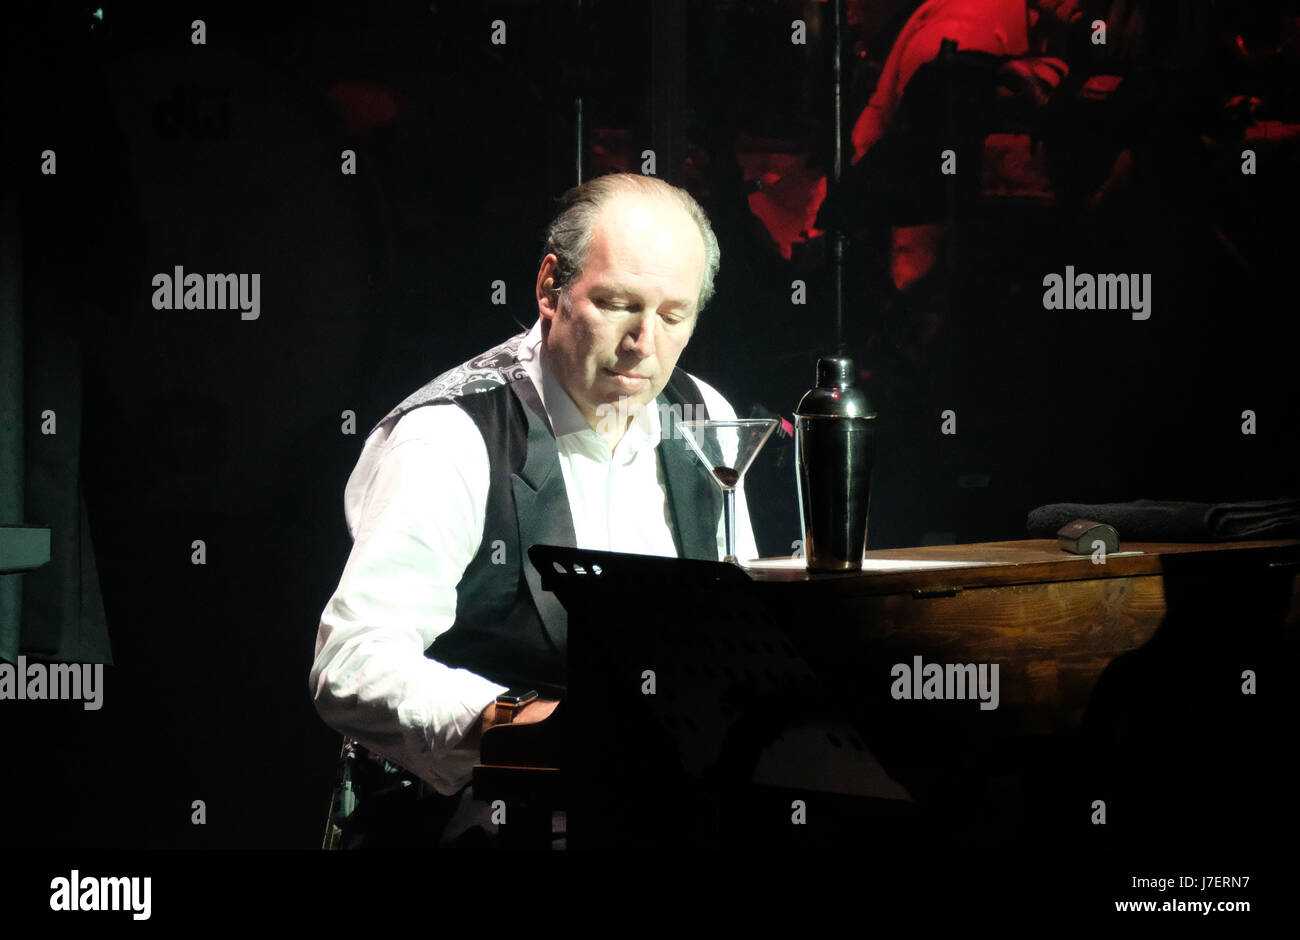 Film music composer Hans Zimmer plays the piano in the Arena in Leipzig,  Germany, 24 May 2017. The Oscar-winning composer is giving two performances  in Germany as part of his european tour.